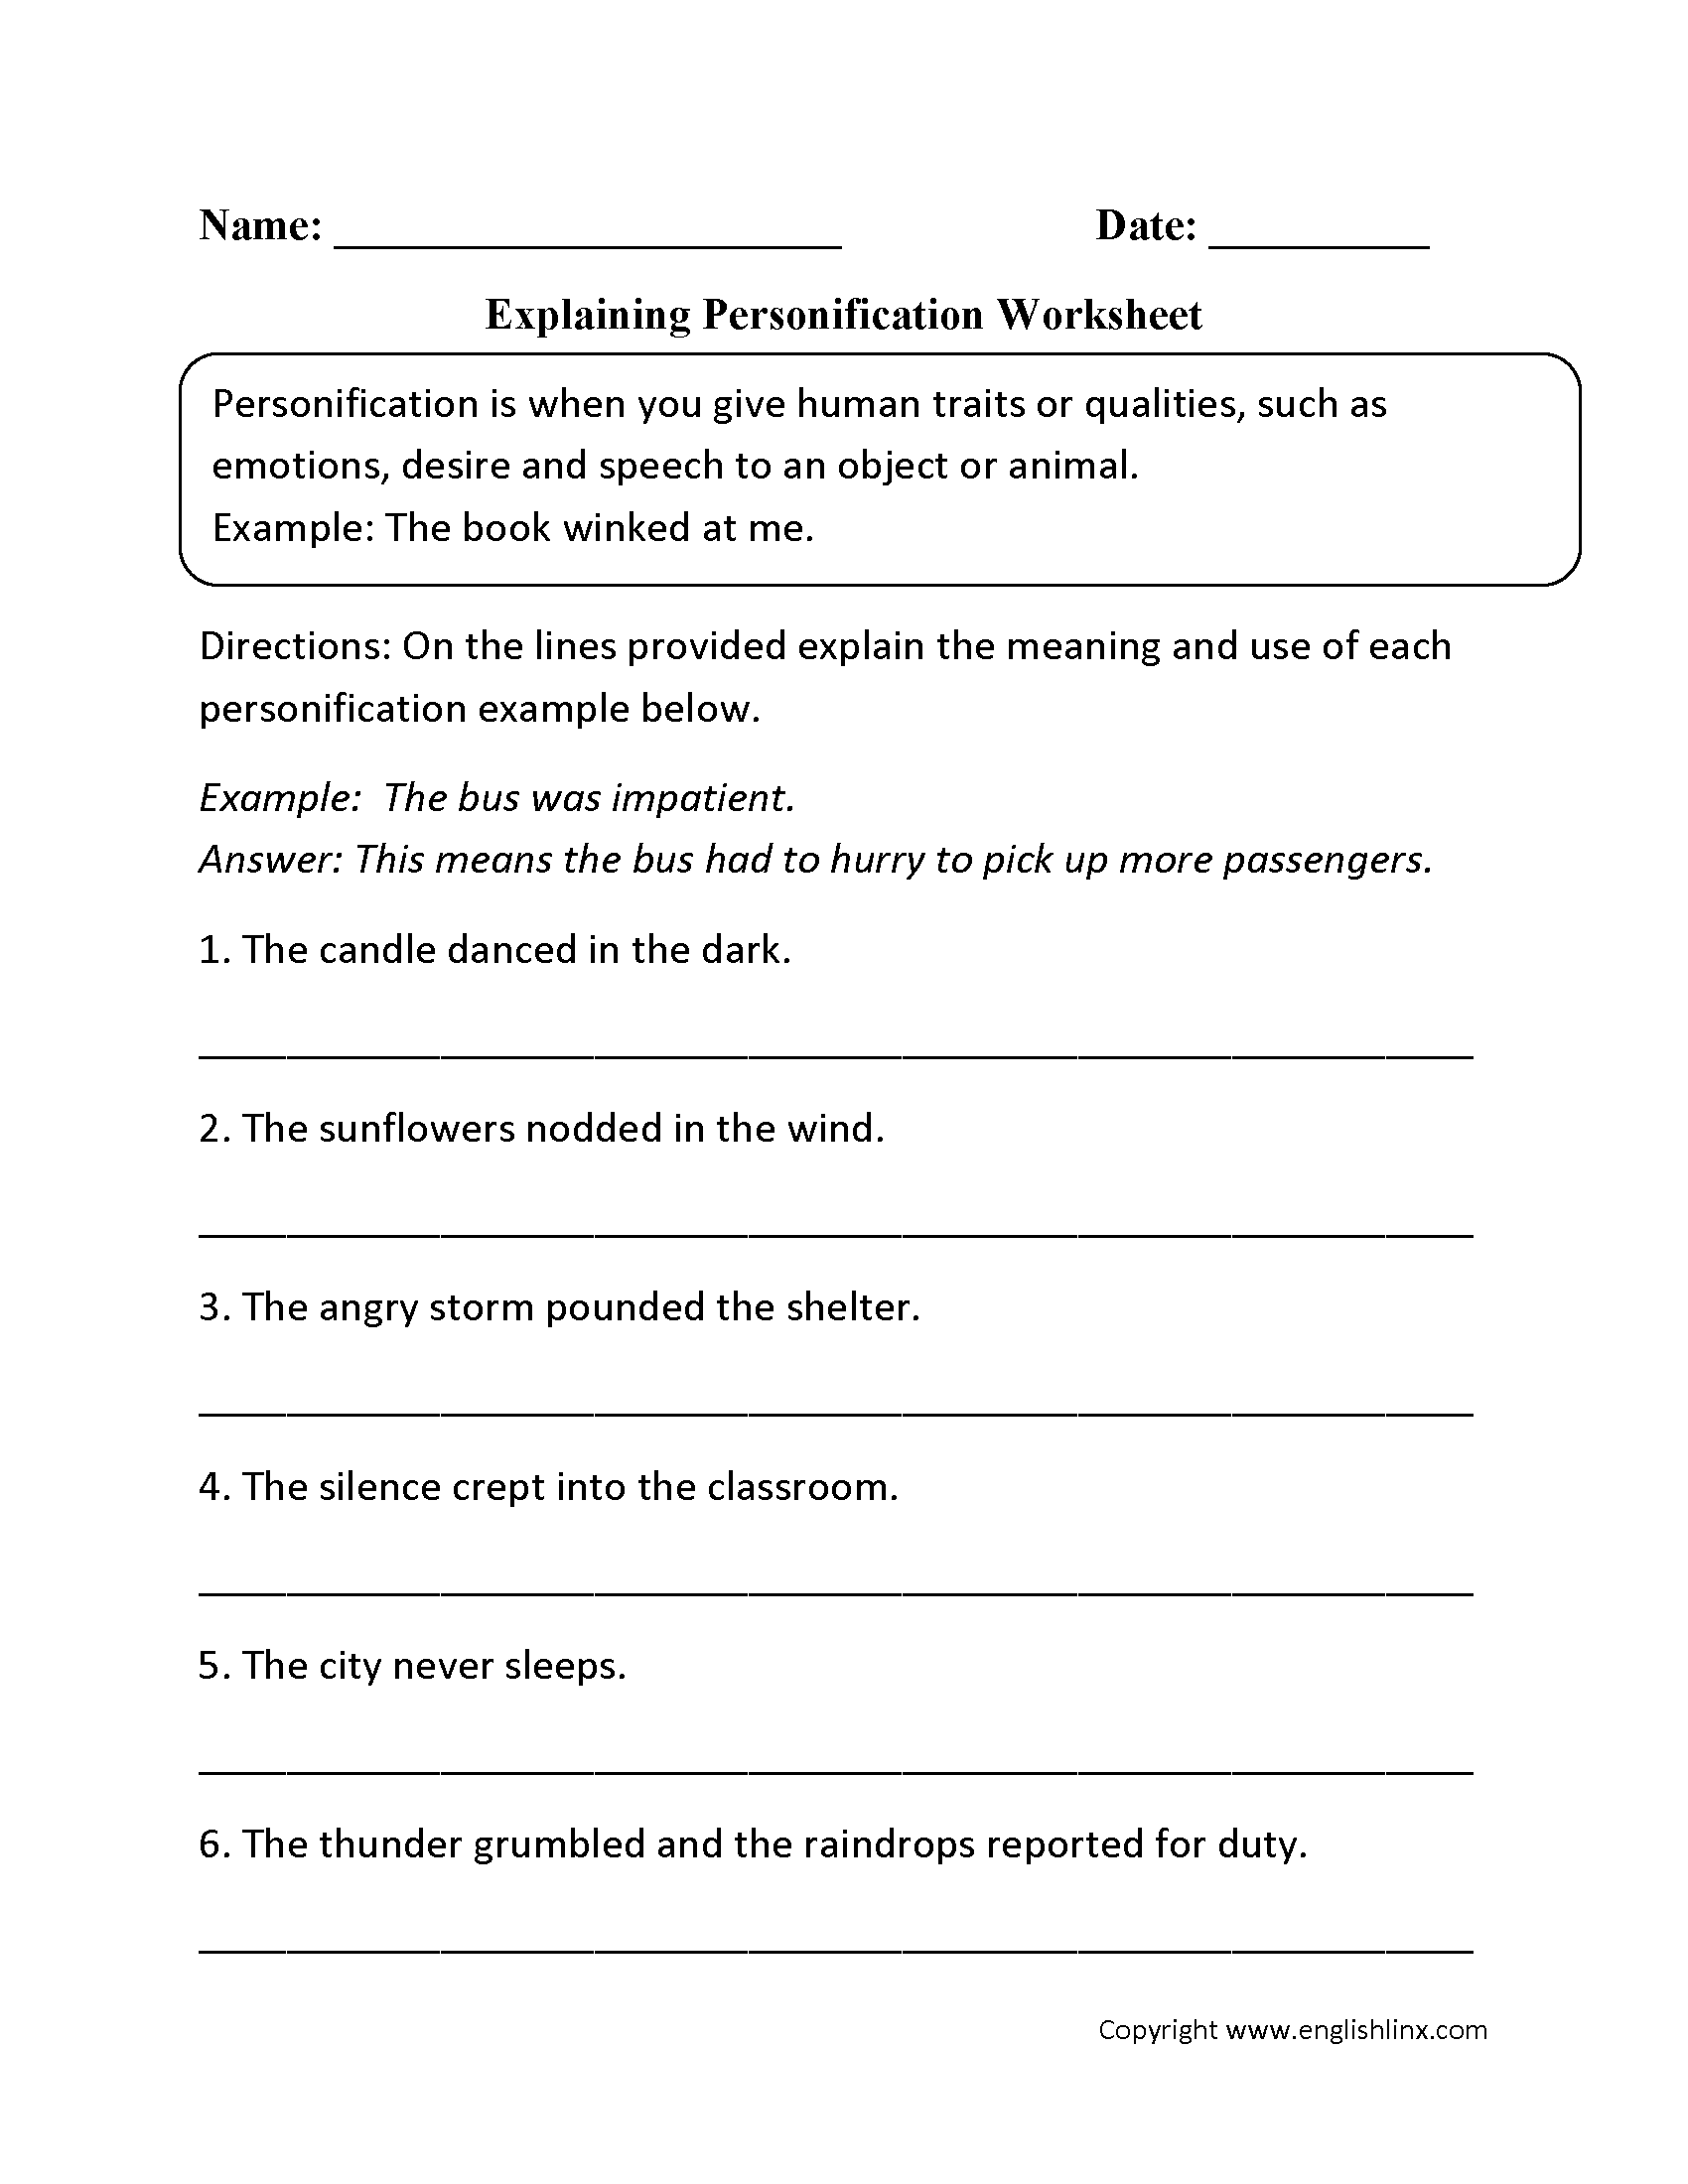 Personification Worksheets Image